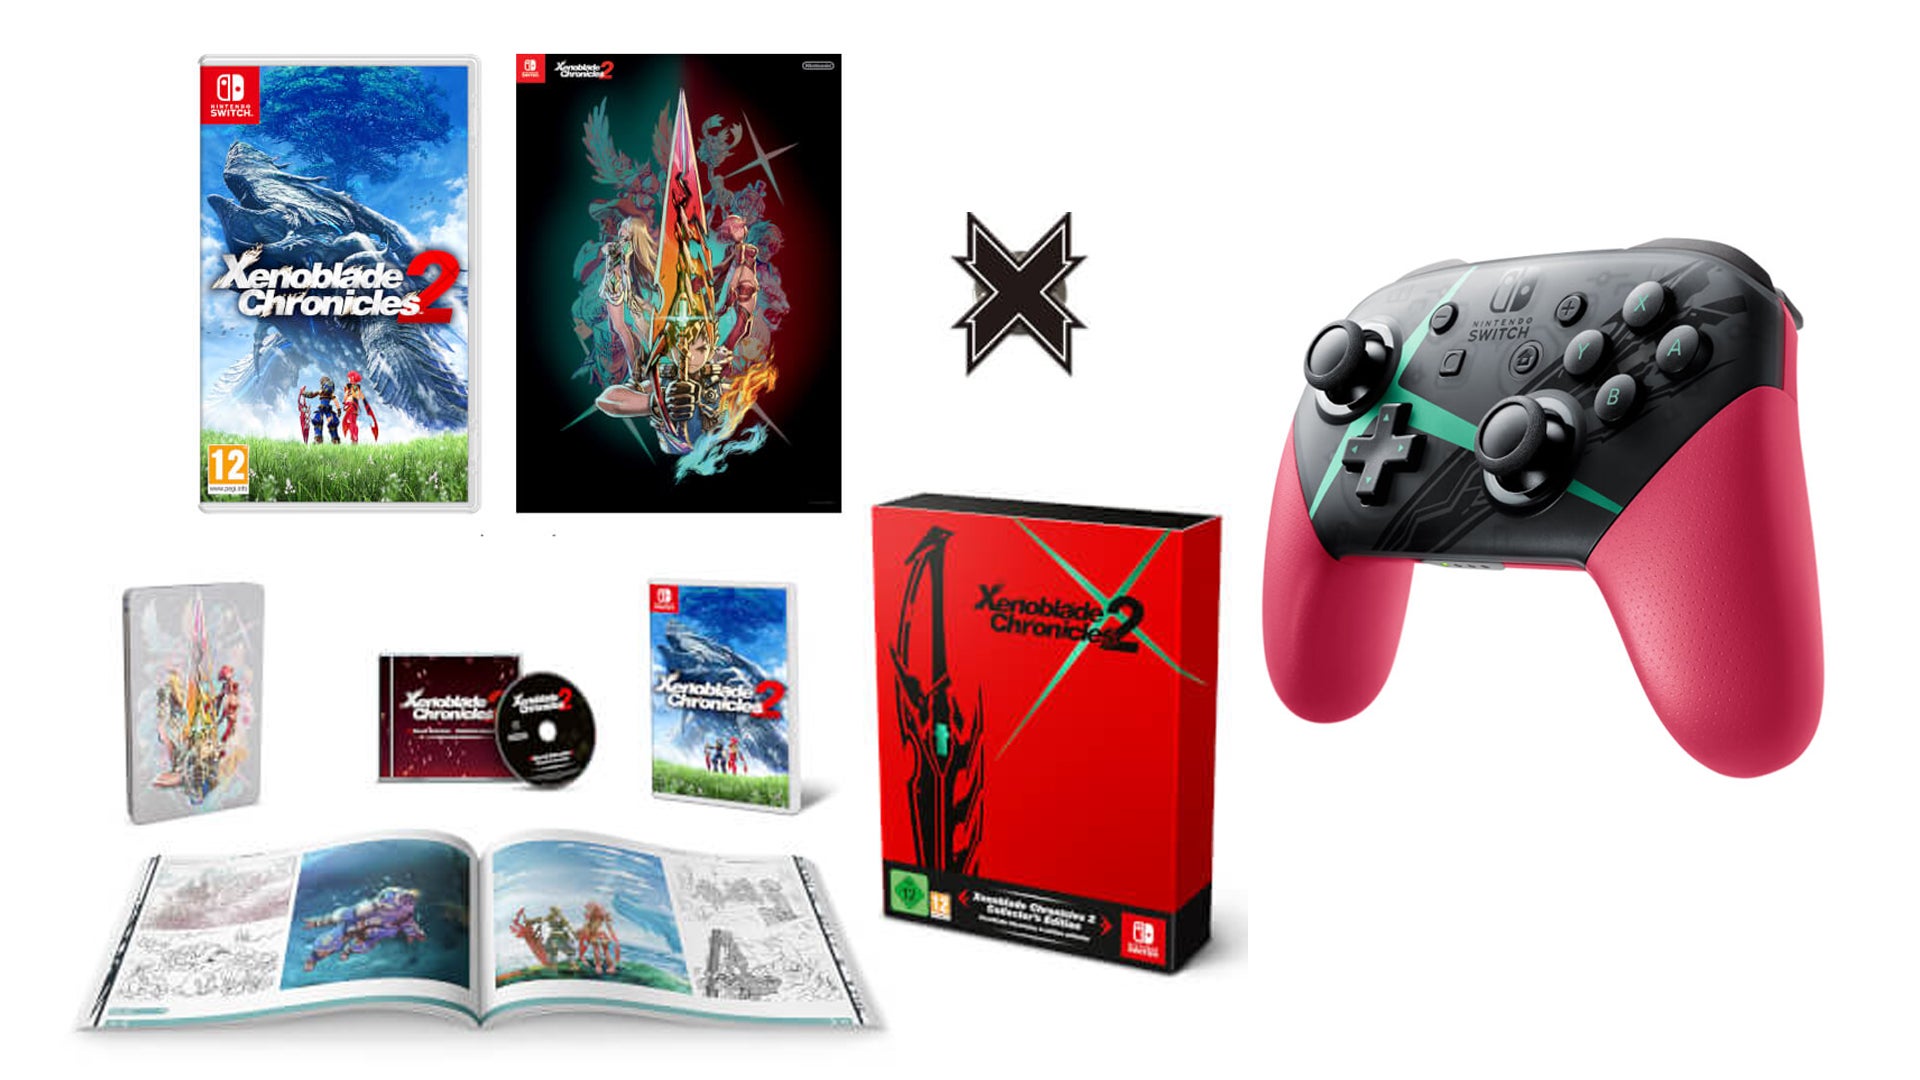 Image for Jelly Deals: Xenoblade Chronicles 2 Collector's Edition and Pro Controller up for pre-order